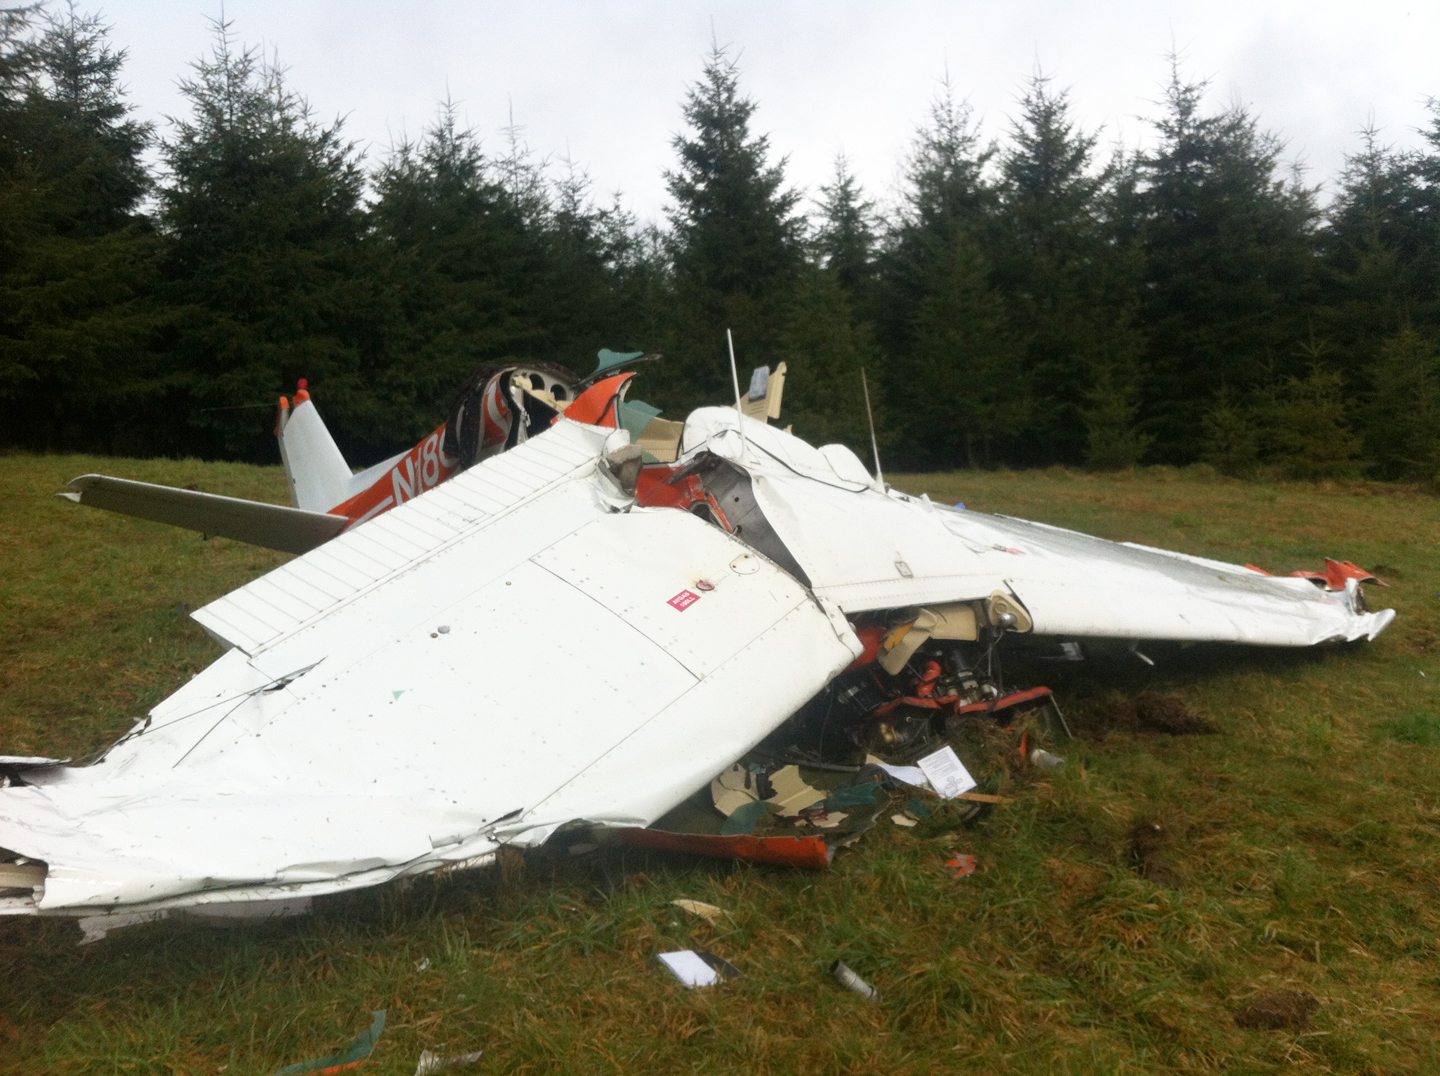 A plane crash near Goble, Ore., killed a Camas flight instructor and a teenage student pilot late Wednesday, according to the Columbia County Sheriff's Office.